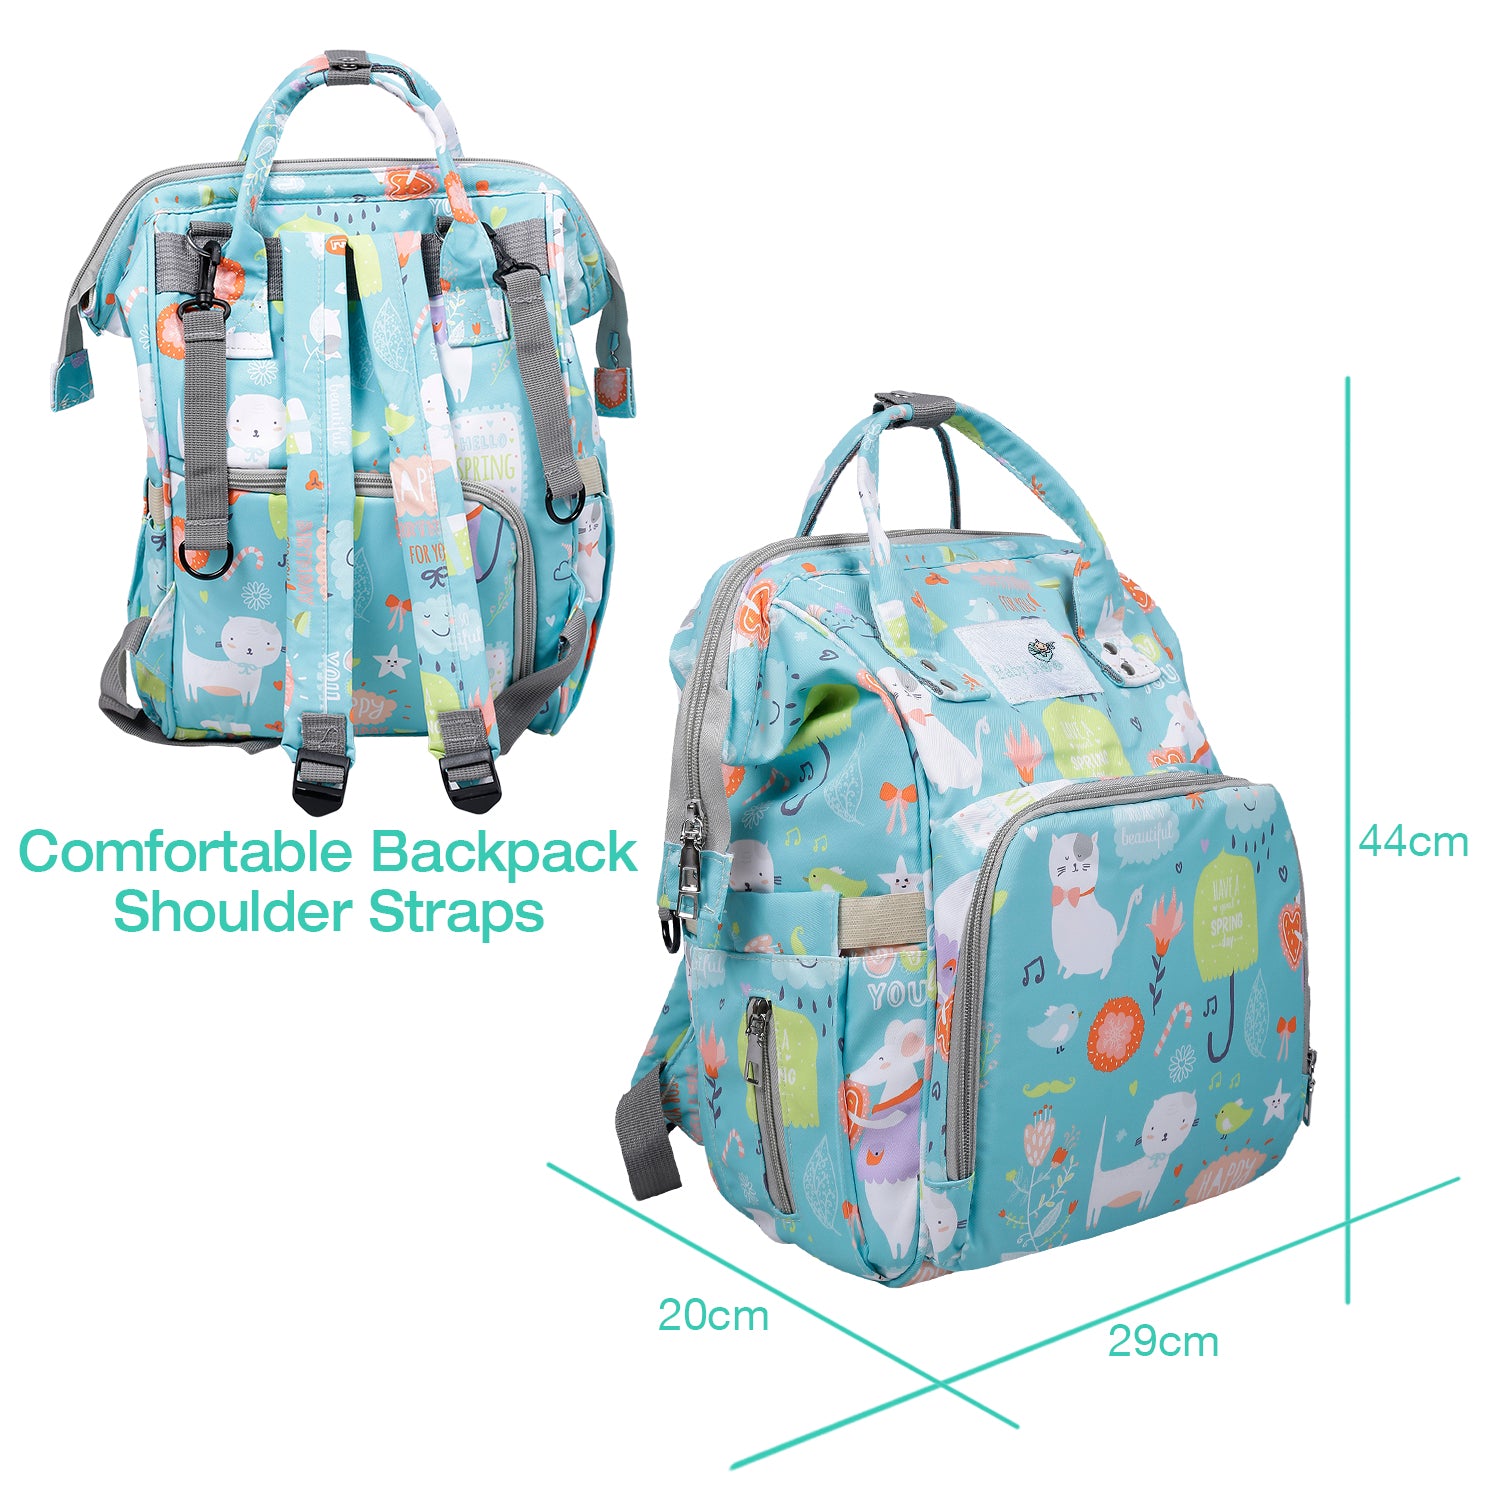 Baby Moo Diaper Bag Maternity Backpack Spring In The Garden Blue